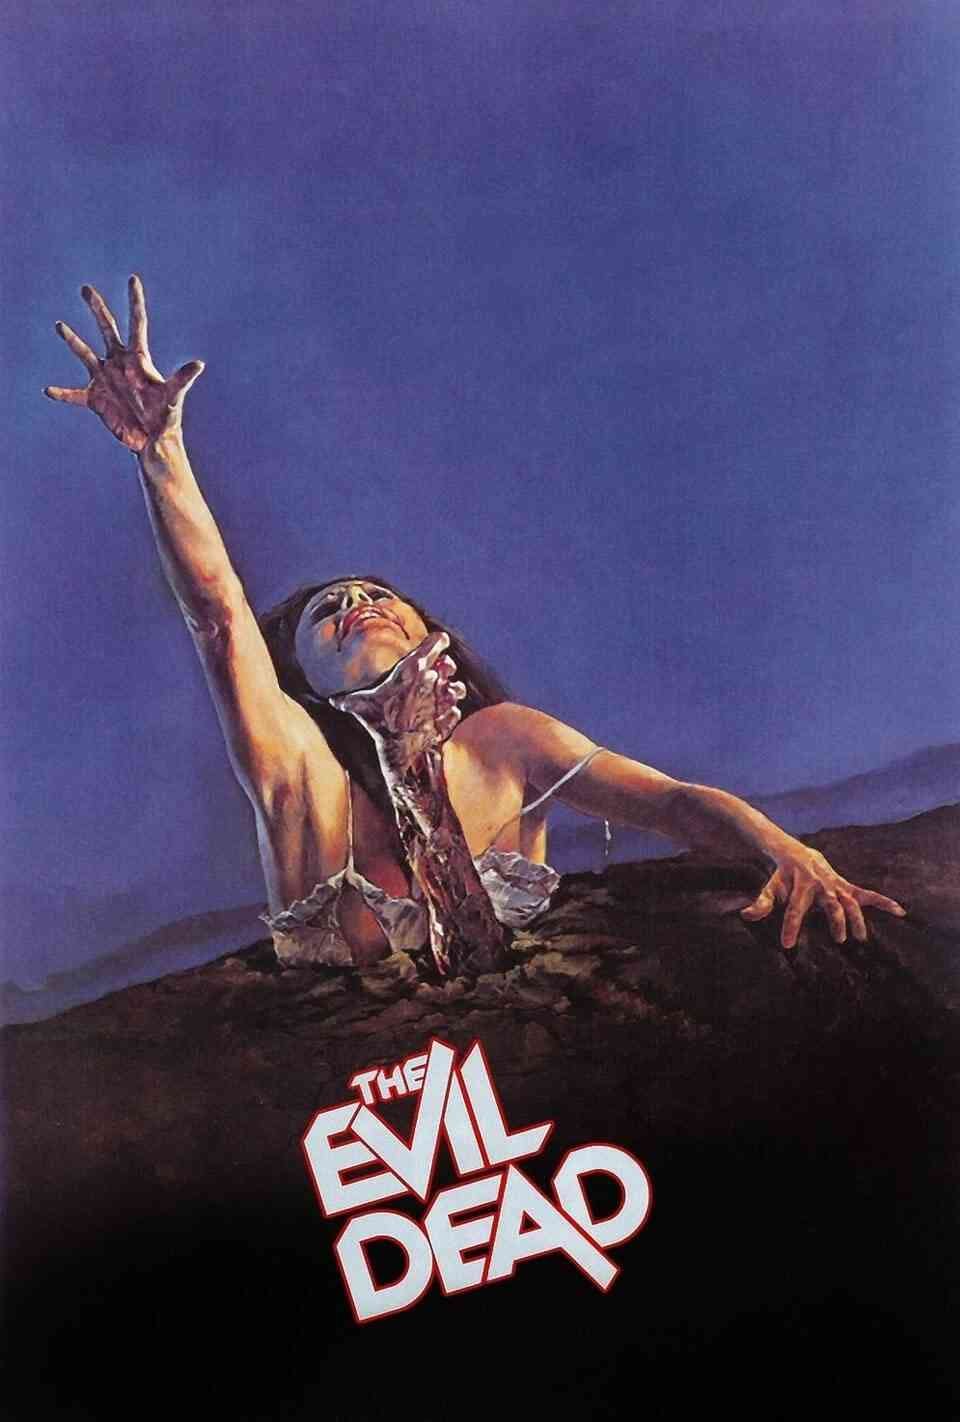 Read The Evil Dead screenplay (poster)